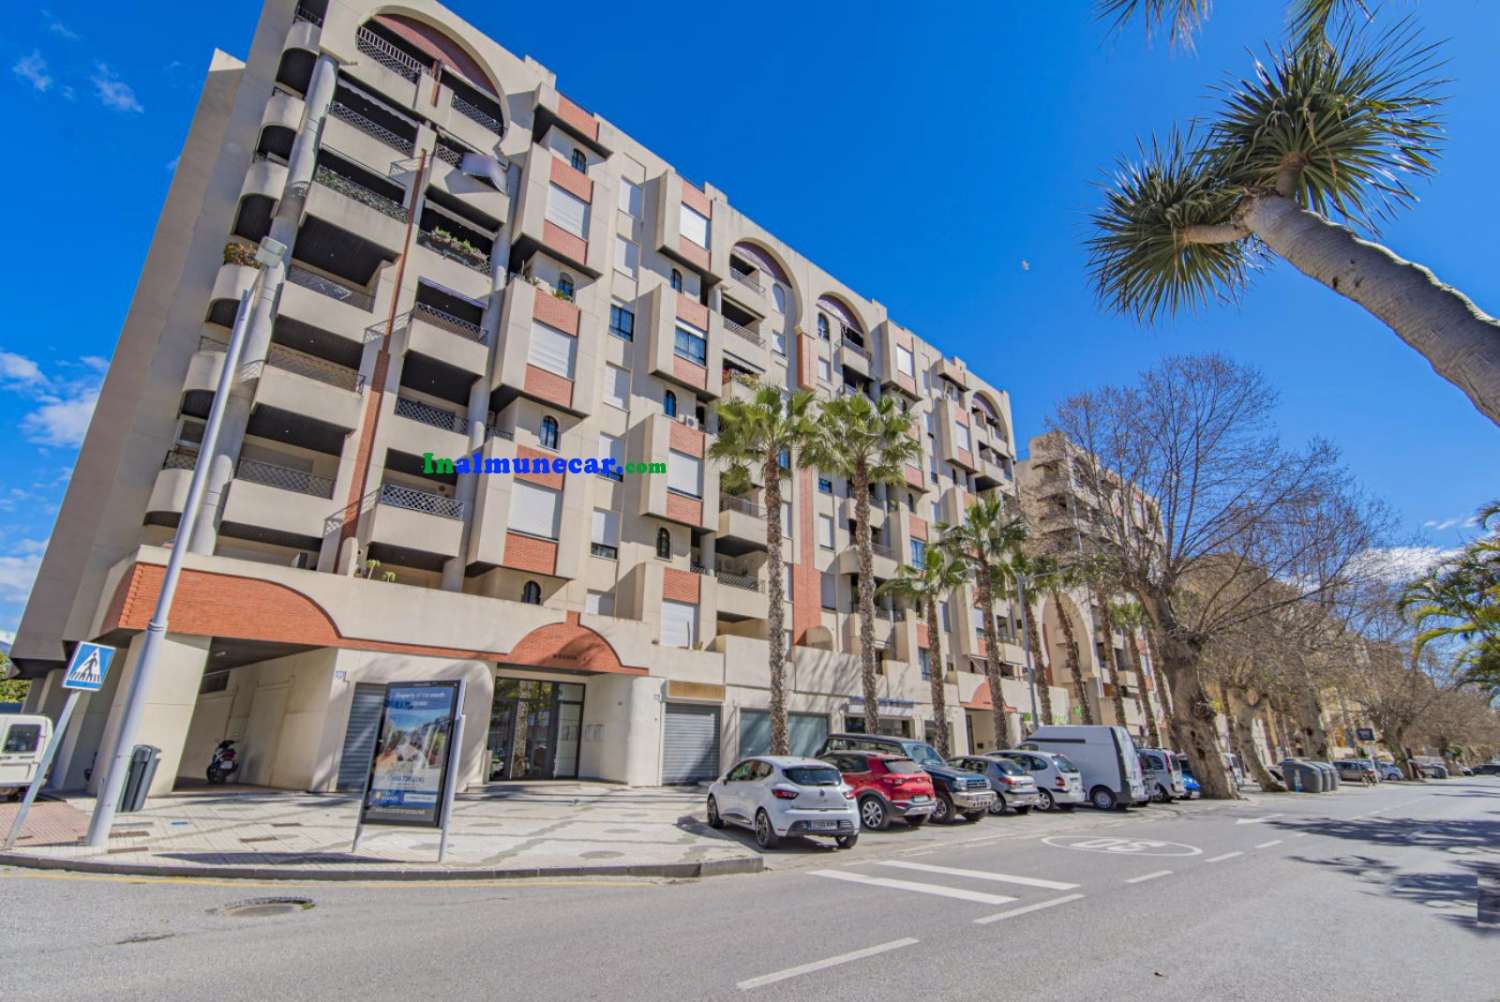 Apartment for sale in Almuñécar with parking space and storage room